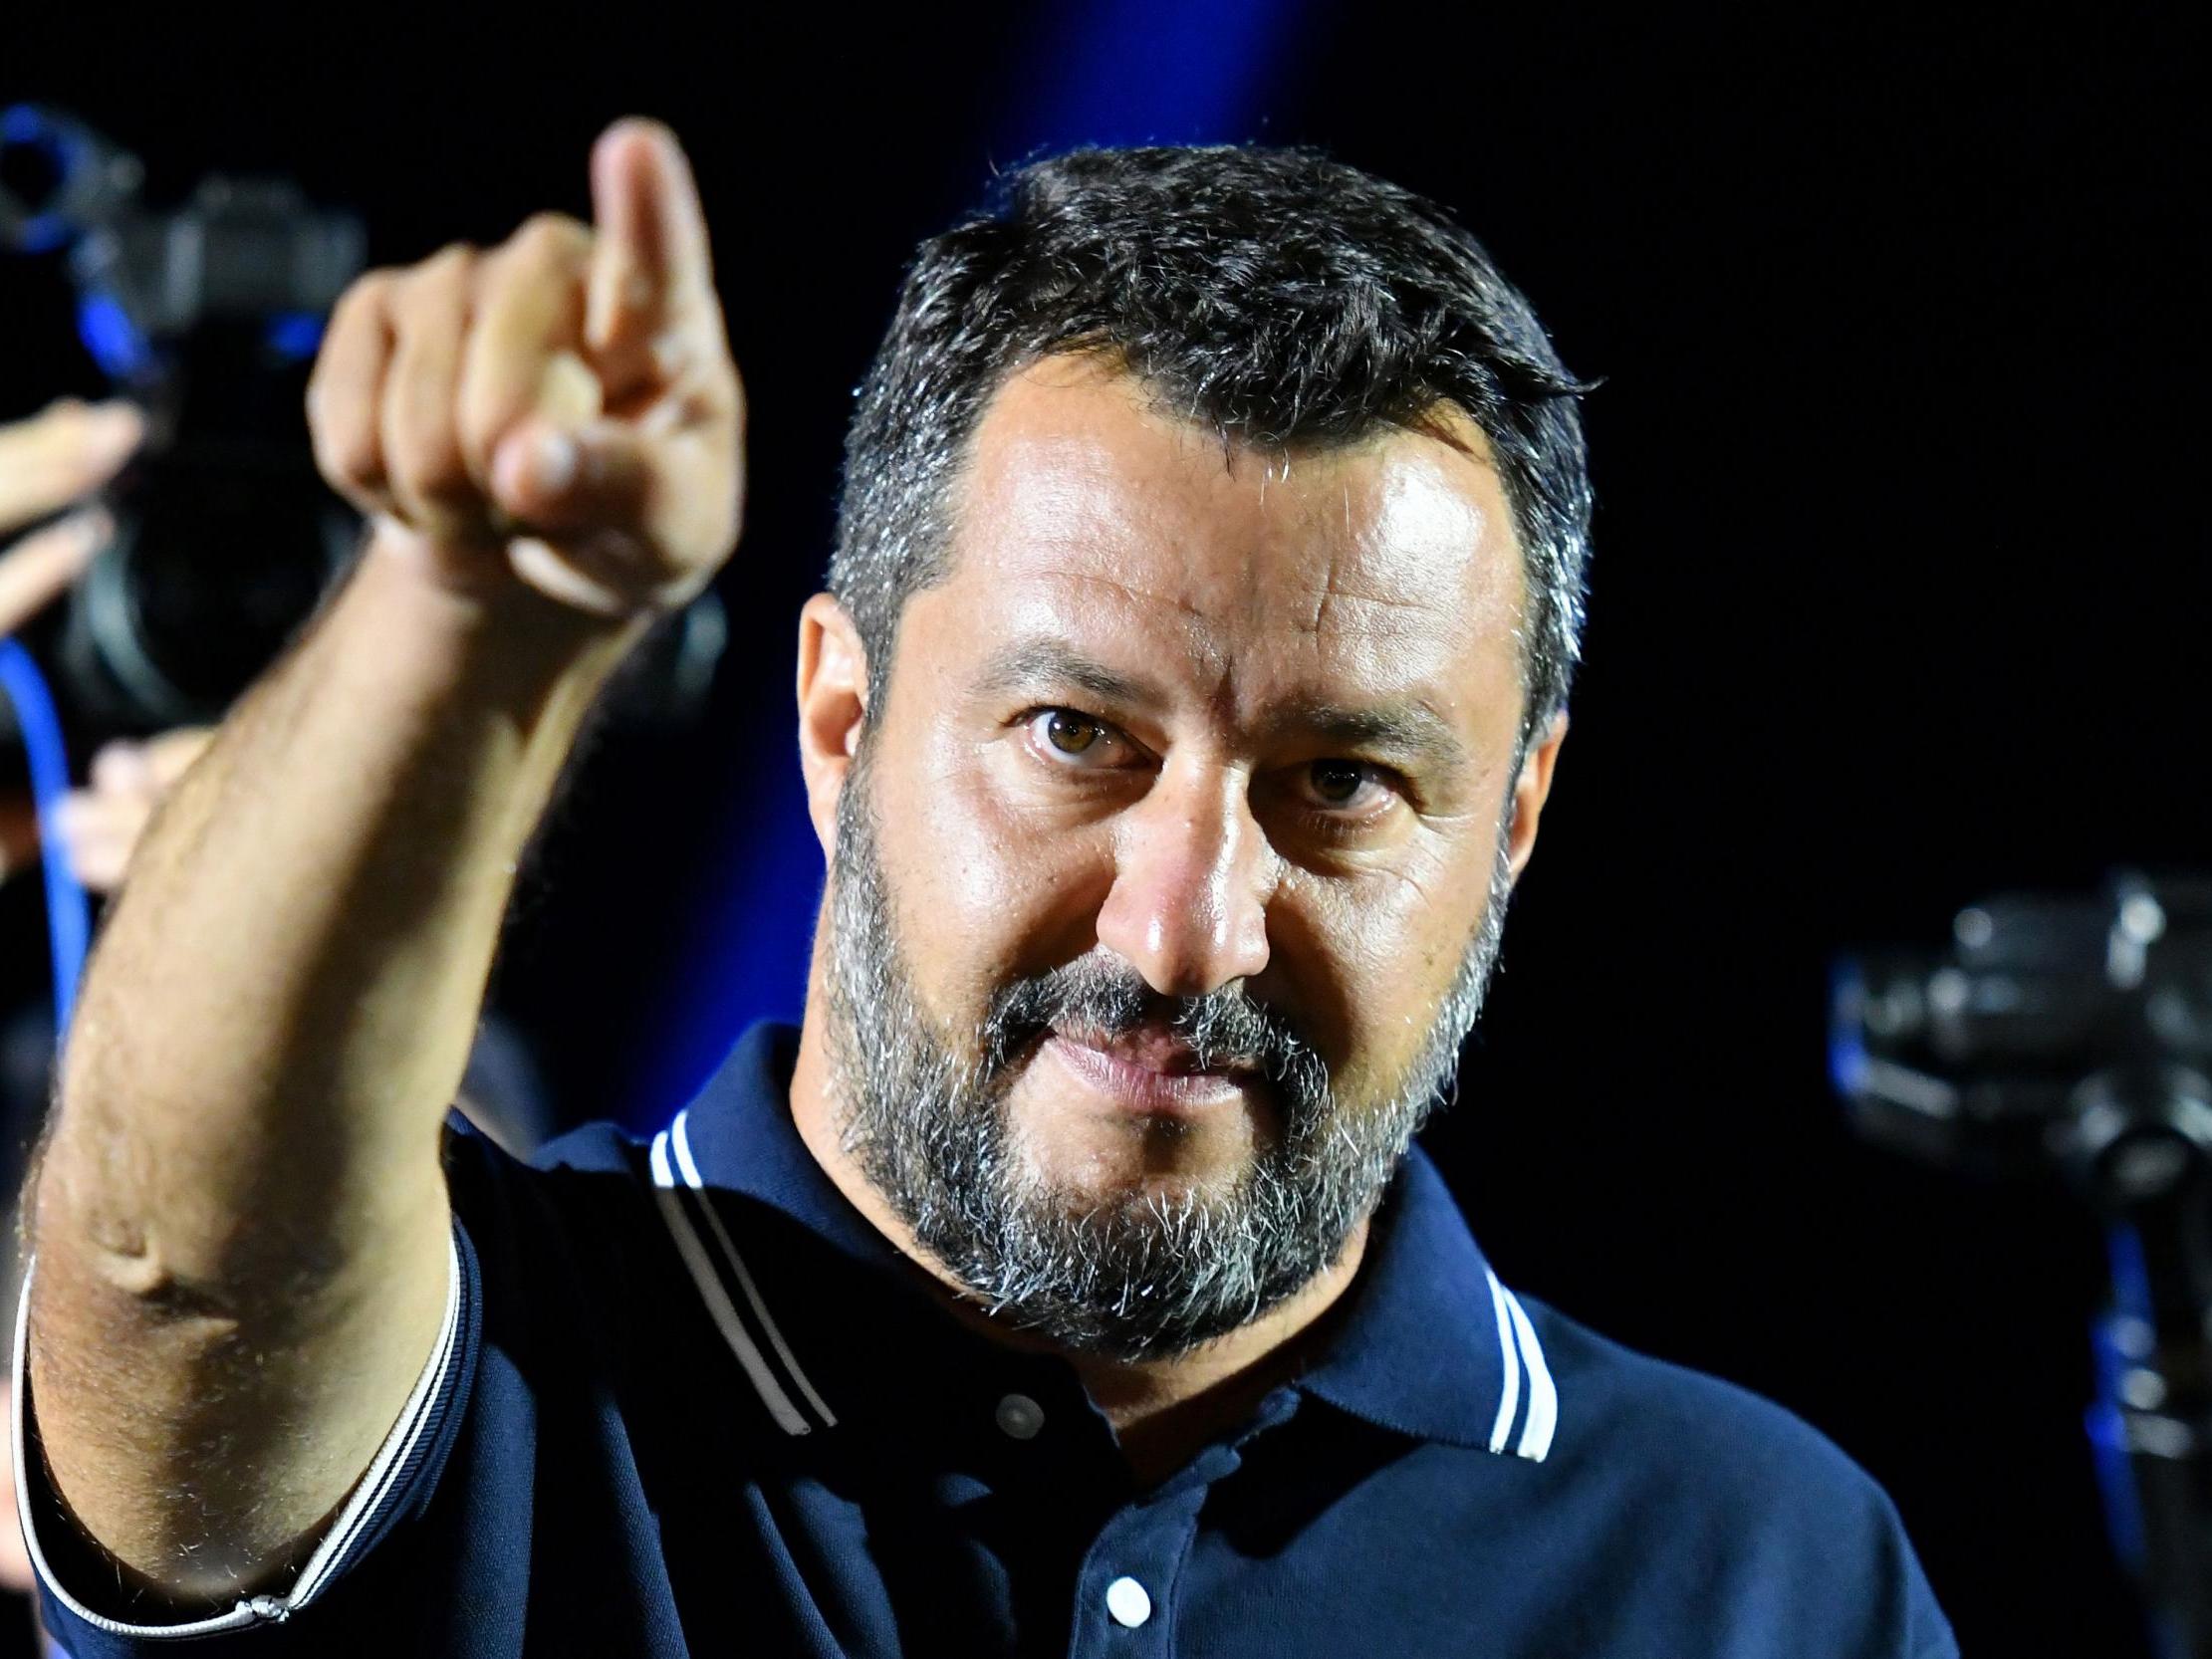 Matteo Salvini has become synonymous with the rise of far-right politics in Europe with his attacks on immigrants and minorities